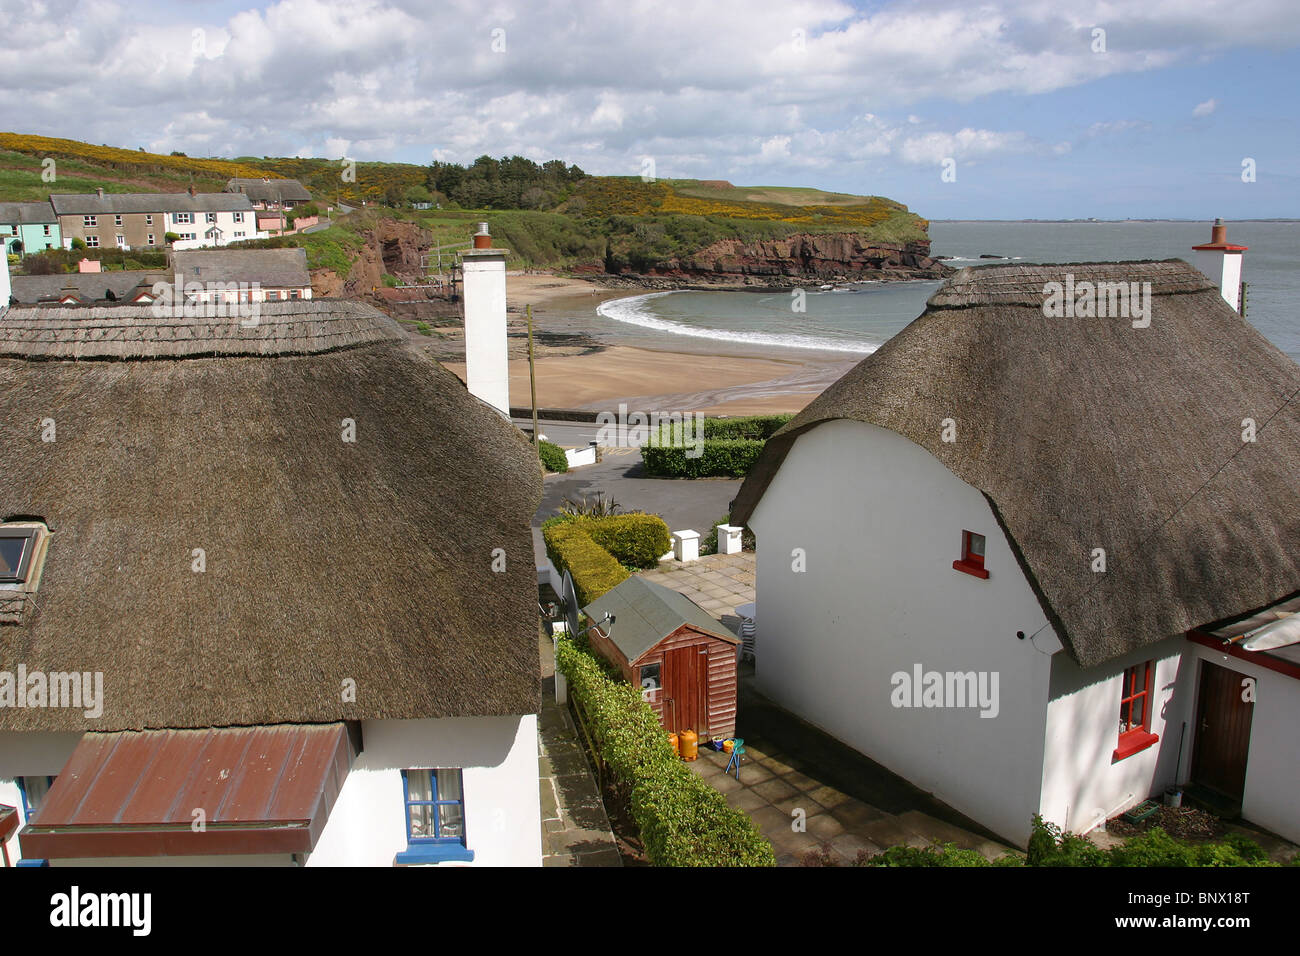 Small Thatched Cottages Rental Stock Photos Small Thatched